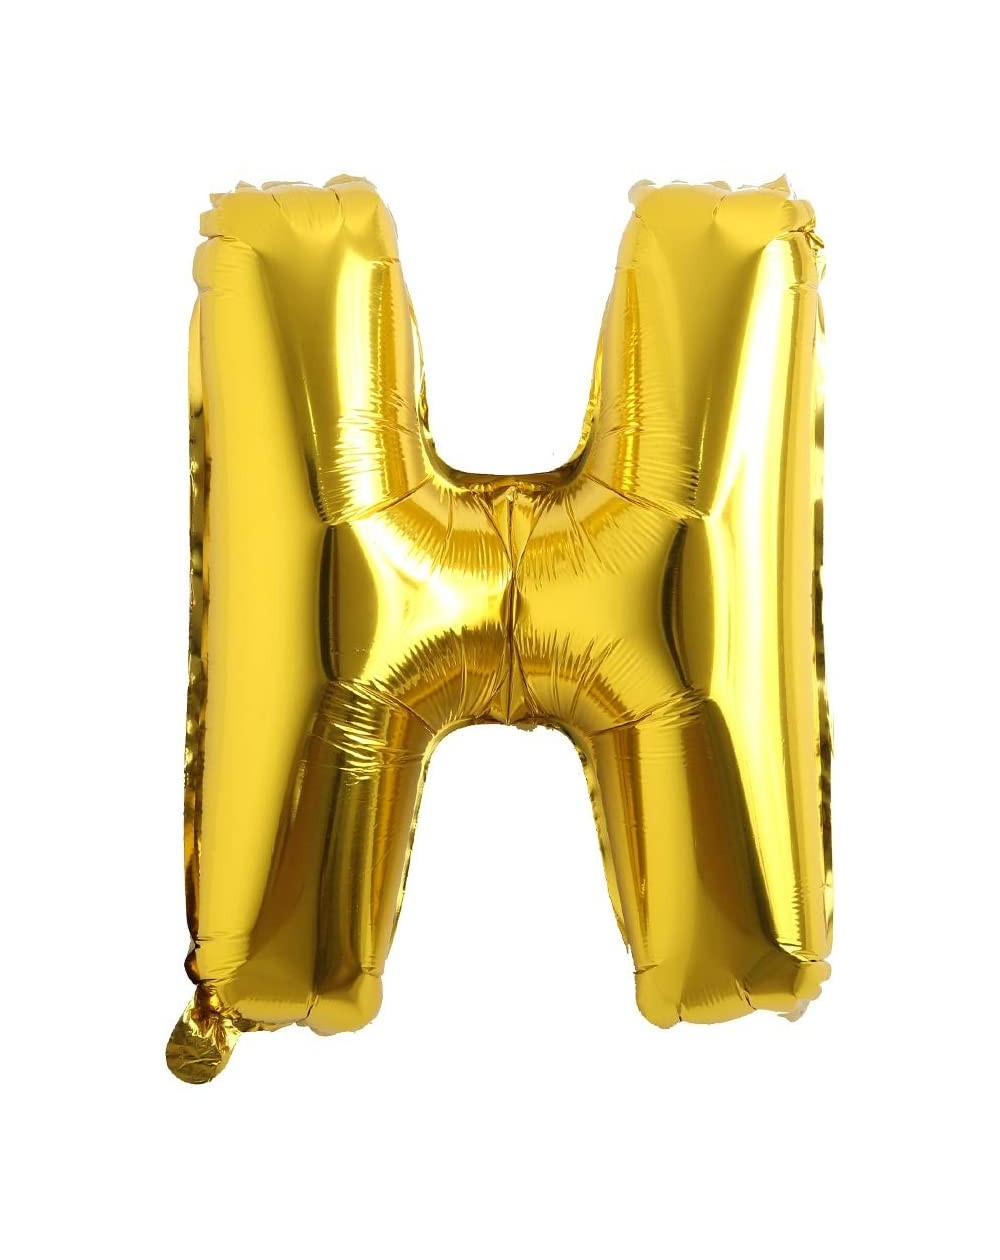 Balloons 16" inch Single Gold Alphabet Letter Number Balloons Aluminum Hanging Foil Film Balloon Wedding Birthday Party Decor...